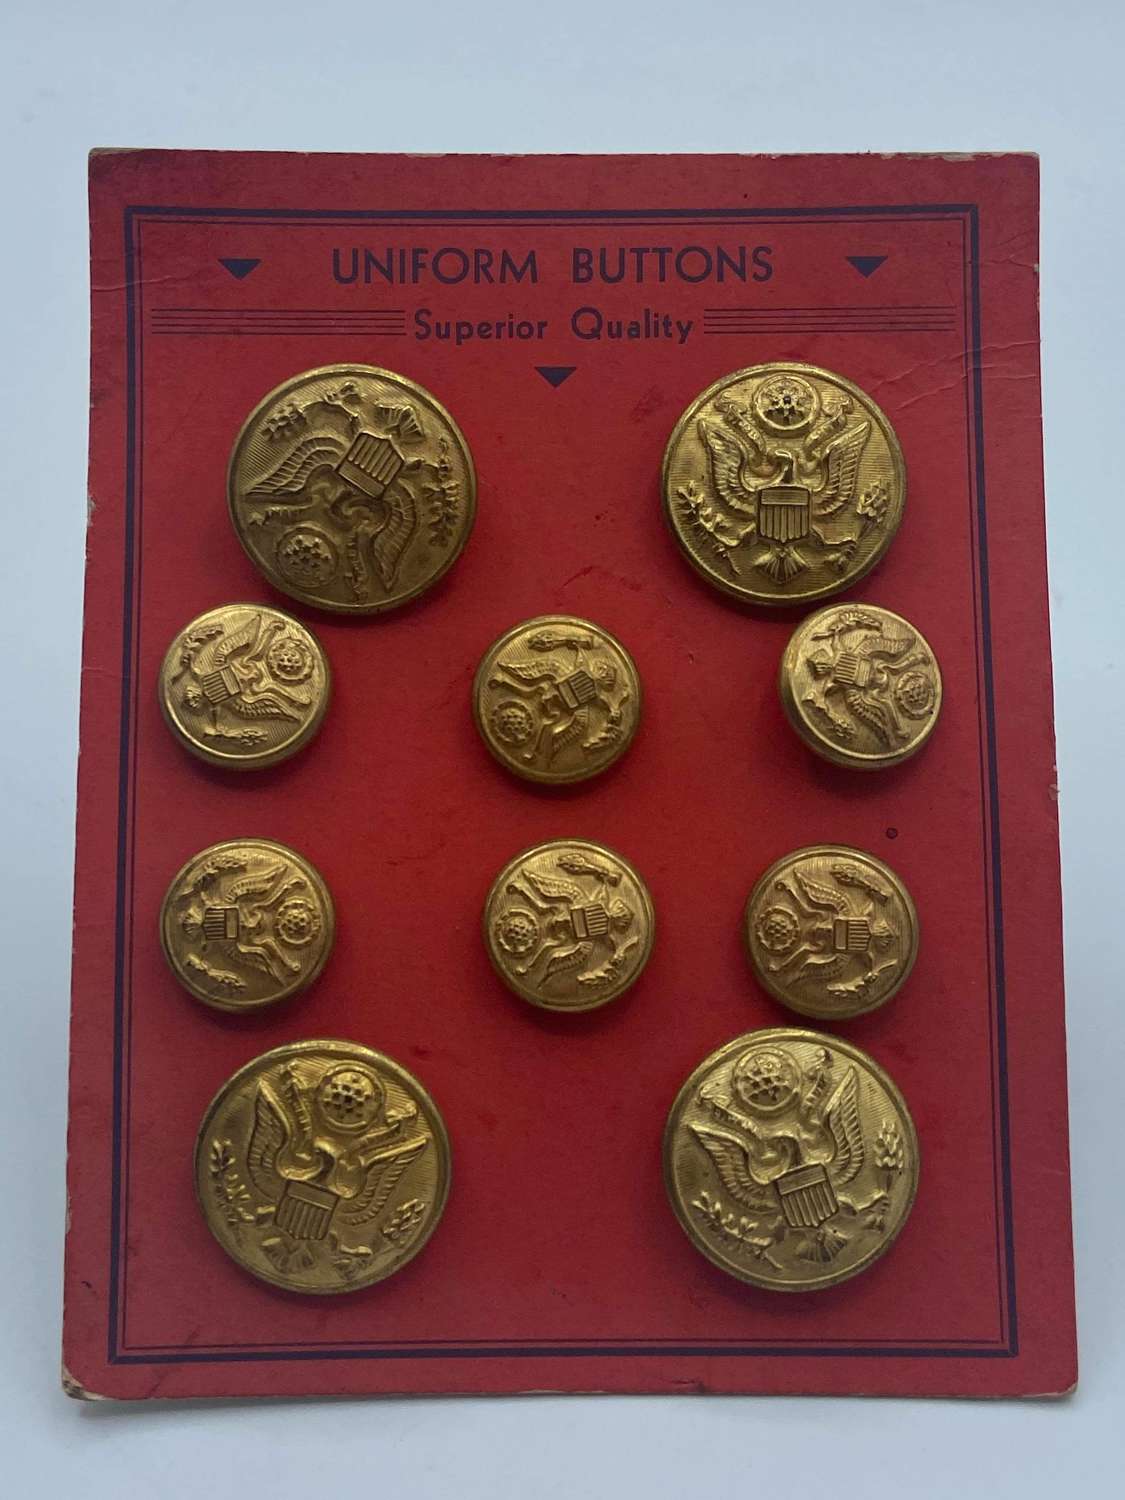 WW2 United States Army Uniform Buttons Superior Quality Complete